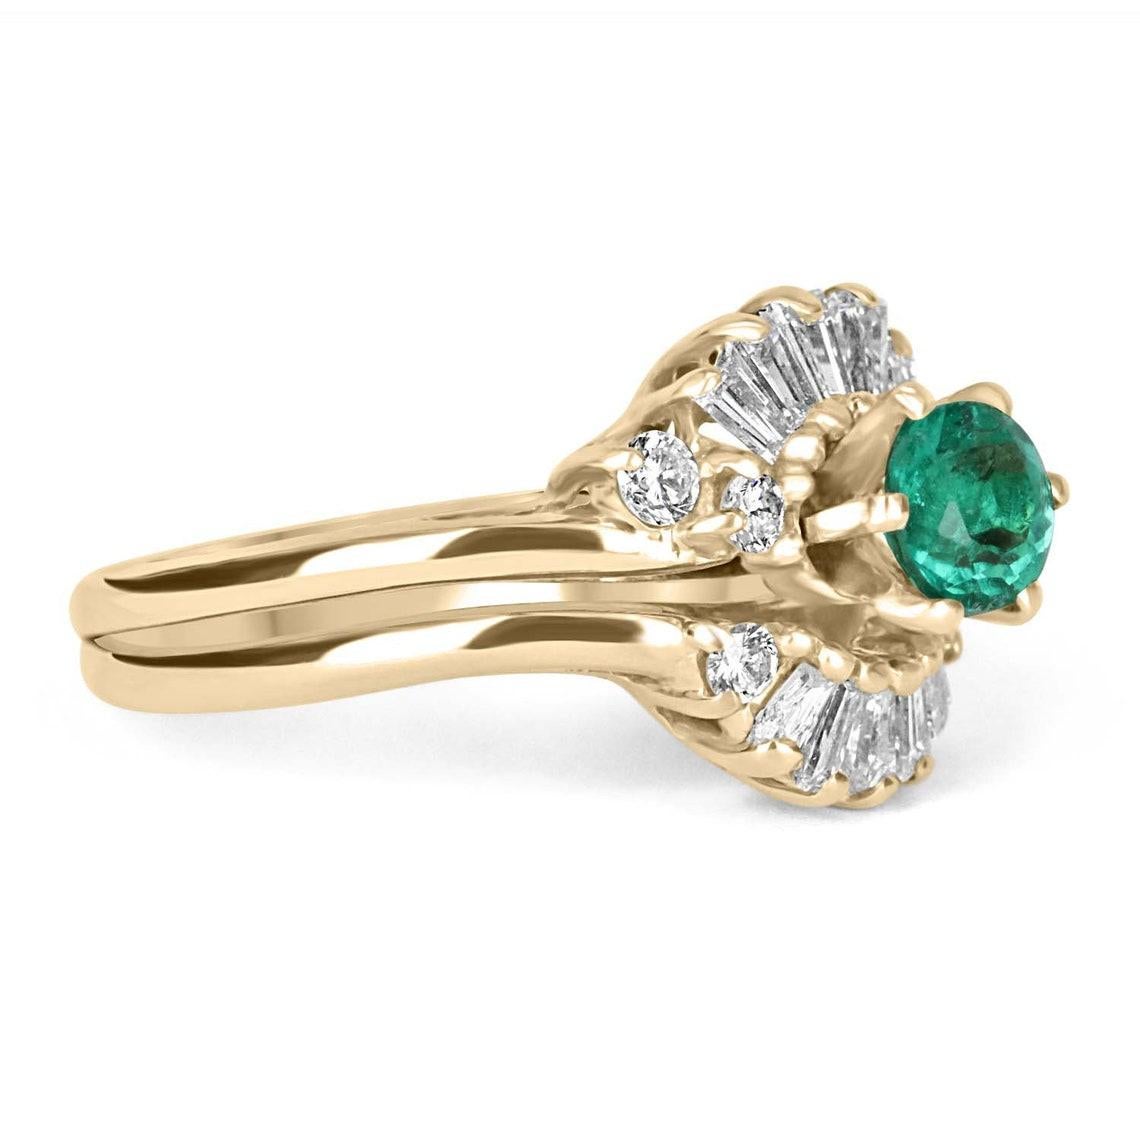 Displayed is a showstopping emerald and diamond ballerina ring, with a total weight of 1.90 carats. The center gemstone is a resplendent, round emerald with incredible eye clarity and color, true to its Colombian origin. Emeralds that come from